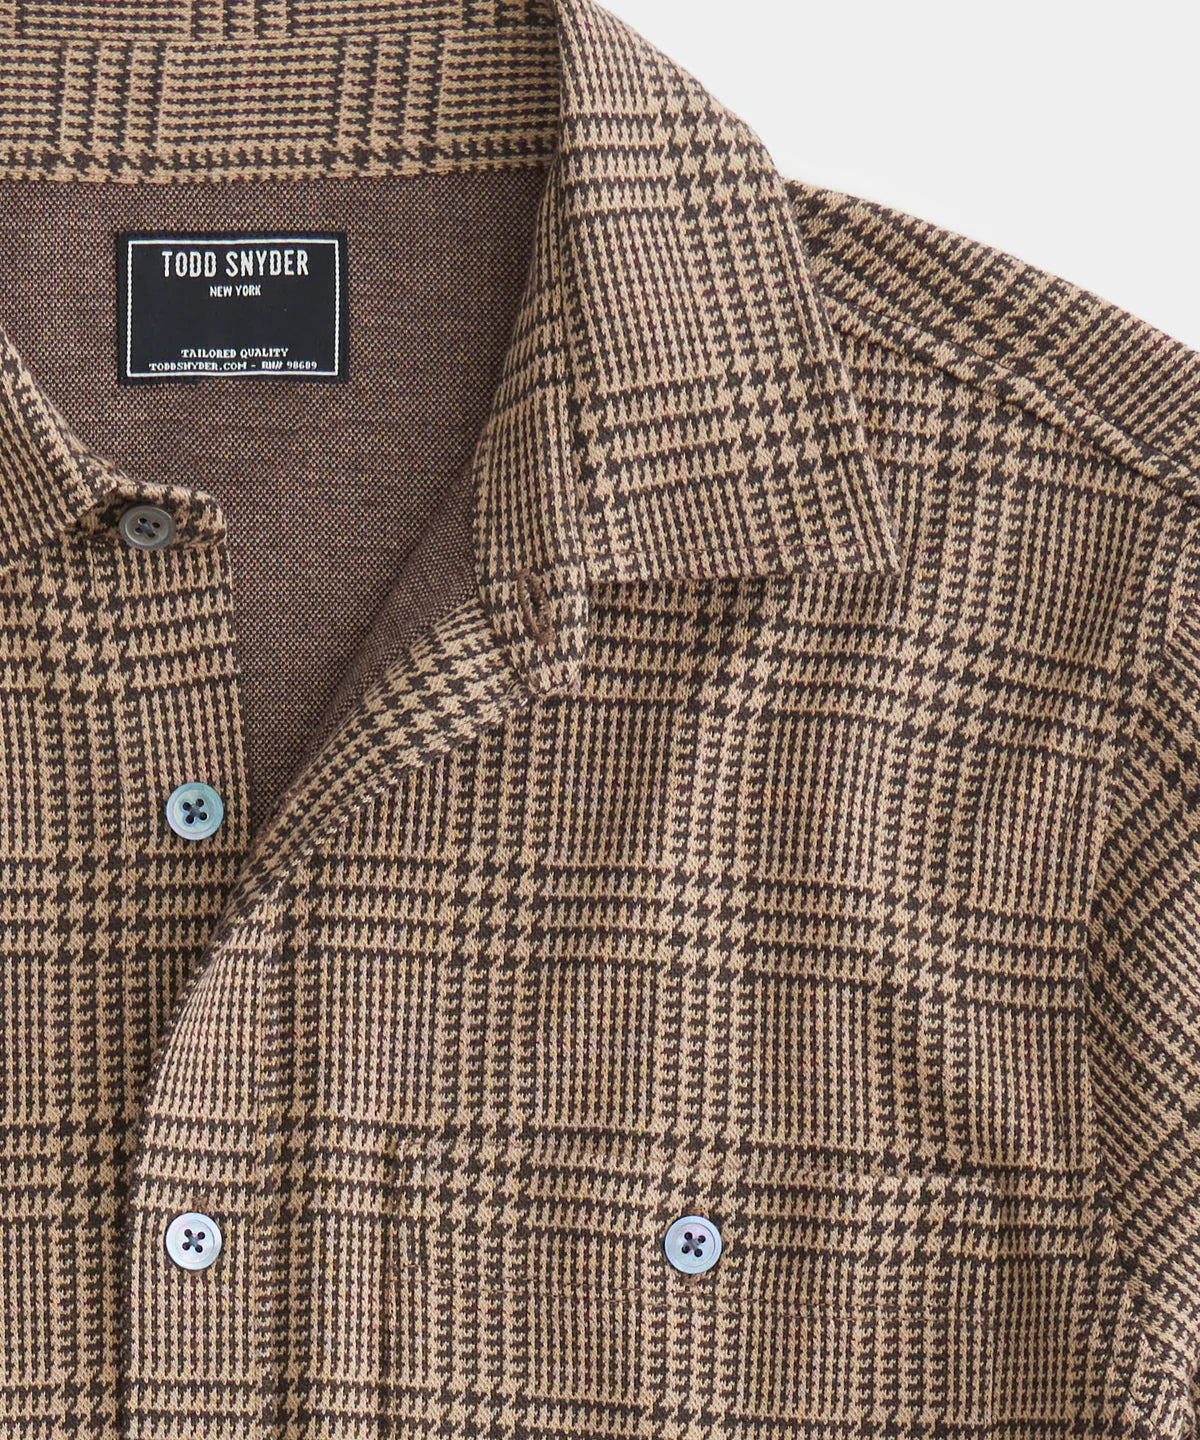 TODD SNYDER LONG-SLEEVE GLEN PLAID DOUBLE KNIT POLO IN GLAZED PECAN